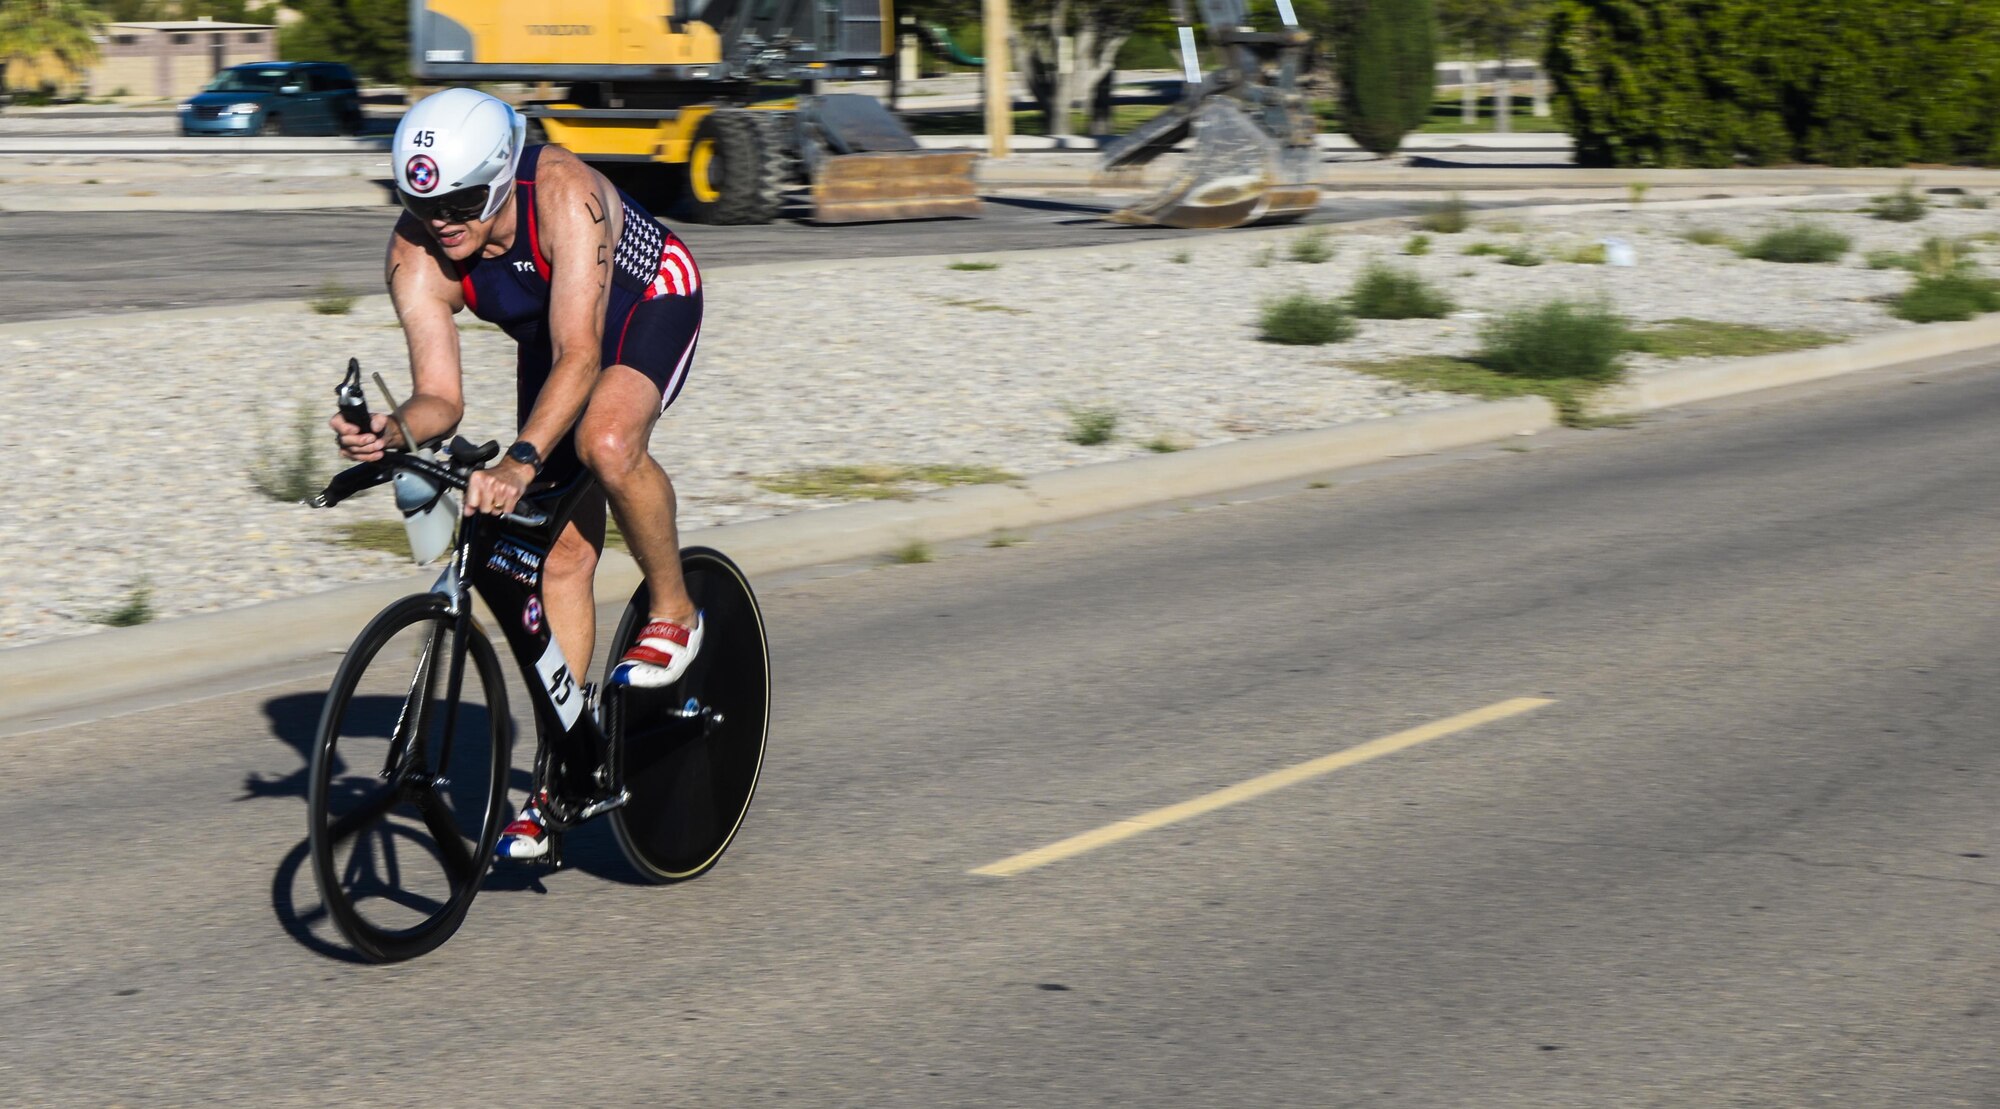 A cyclist swiftly rounds a corner during Holloman’s eighth annual Monster Triathlon at Holloman Air Force Base, N.M. on Sept. 17, 2016. Many race participants wore a hydrodynamic form of exercise attire called speedsuits. (U.S. Air Force photo by Airman 1st Class Alexis P. Docherty)